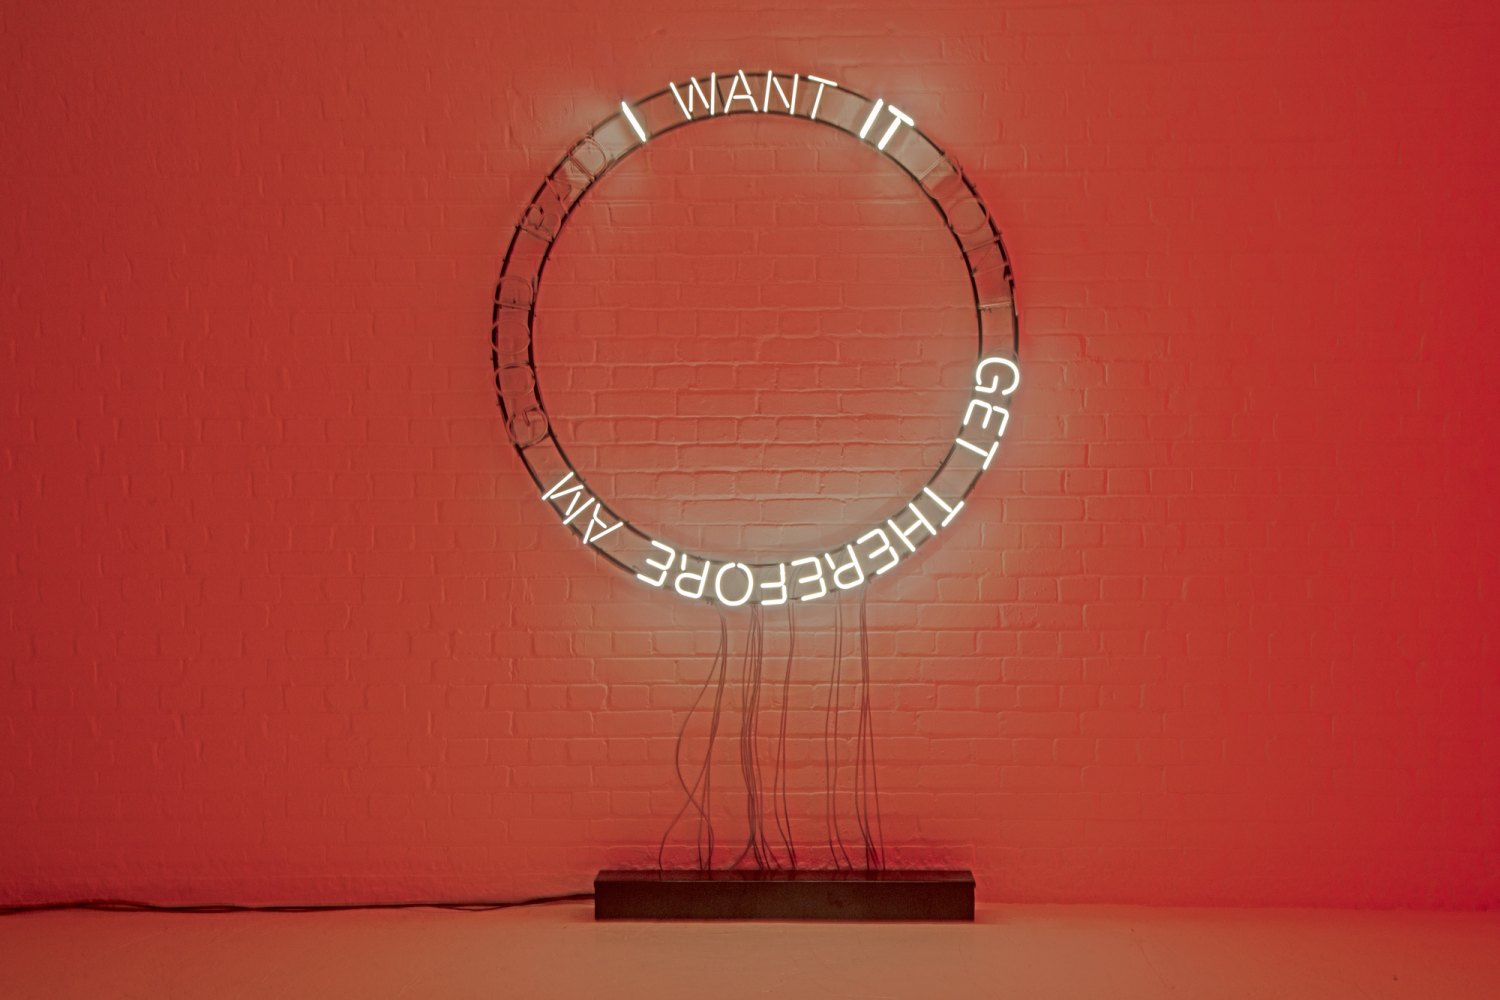 Claire Fontaine  Untitled (I want it I get it therefore I am good I want it I don’t get it therefore I am bad), 2014 10 mm. back-painted neon, framework, cables, sequencer and transformers, 150 x 150 x 5 cm 